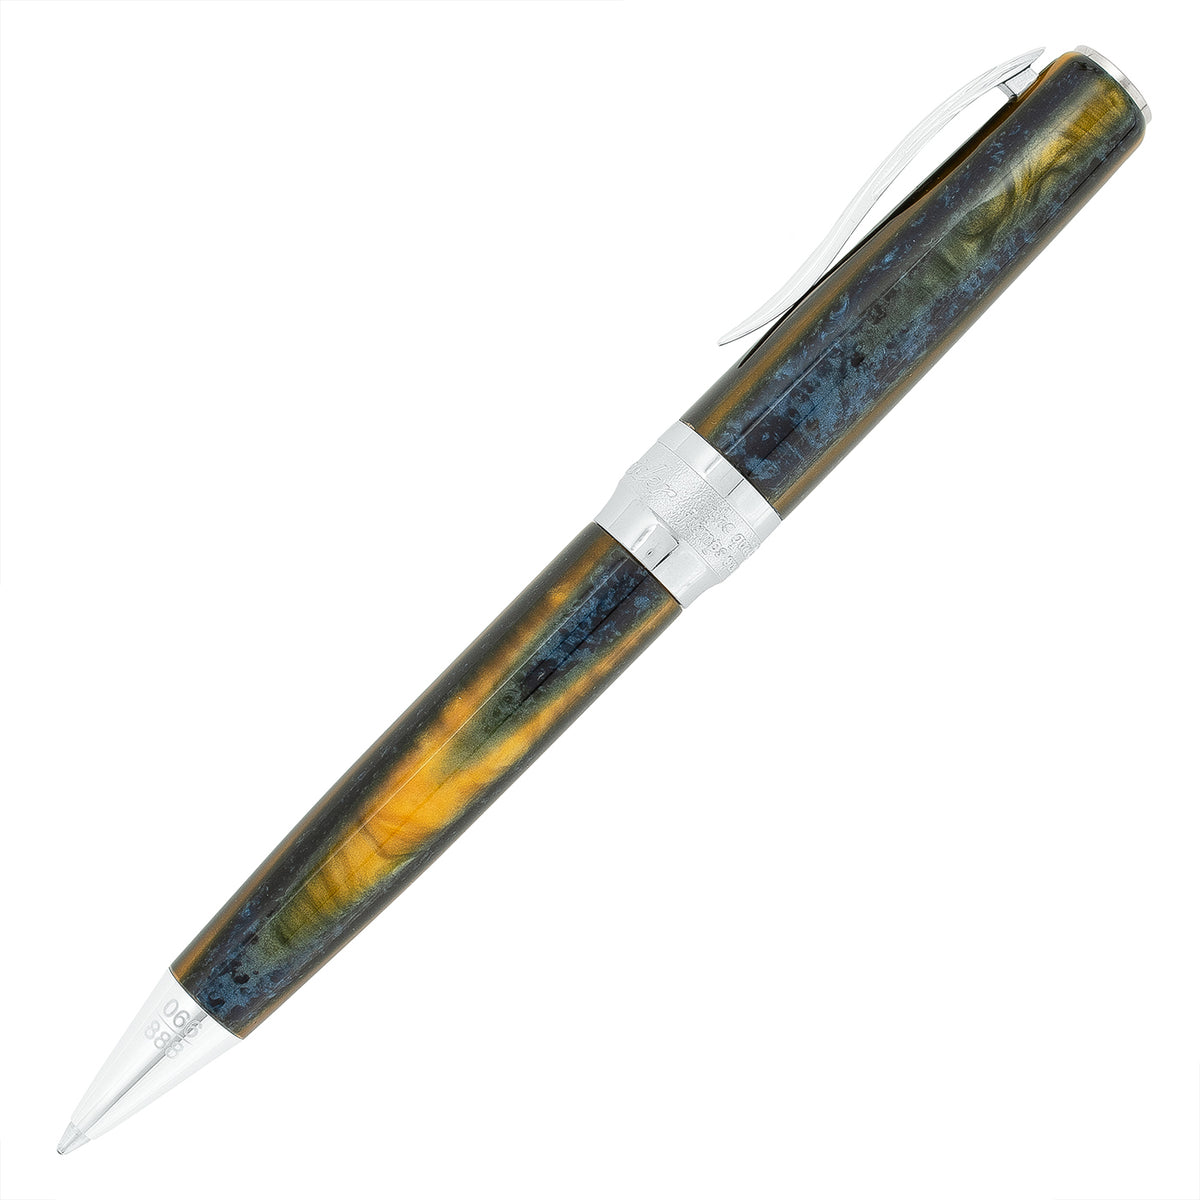 Pineider Arco Blue Bee Ballpoint Limited Edition 888